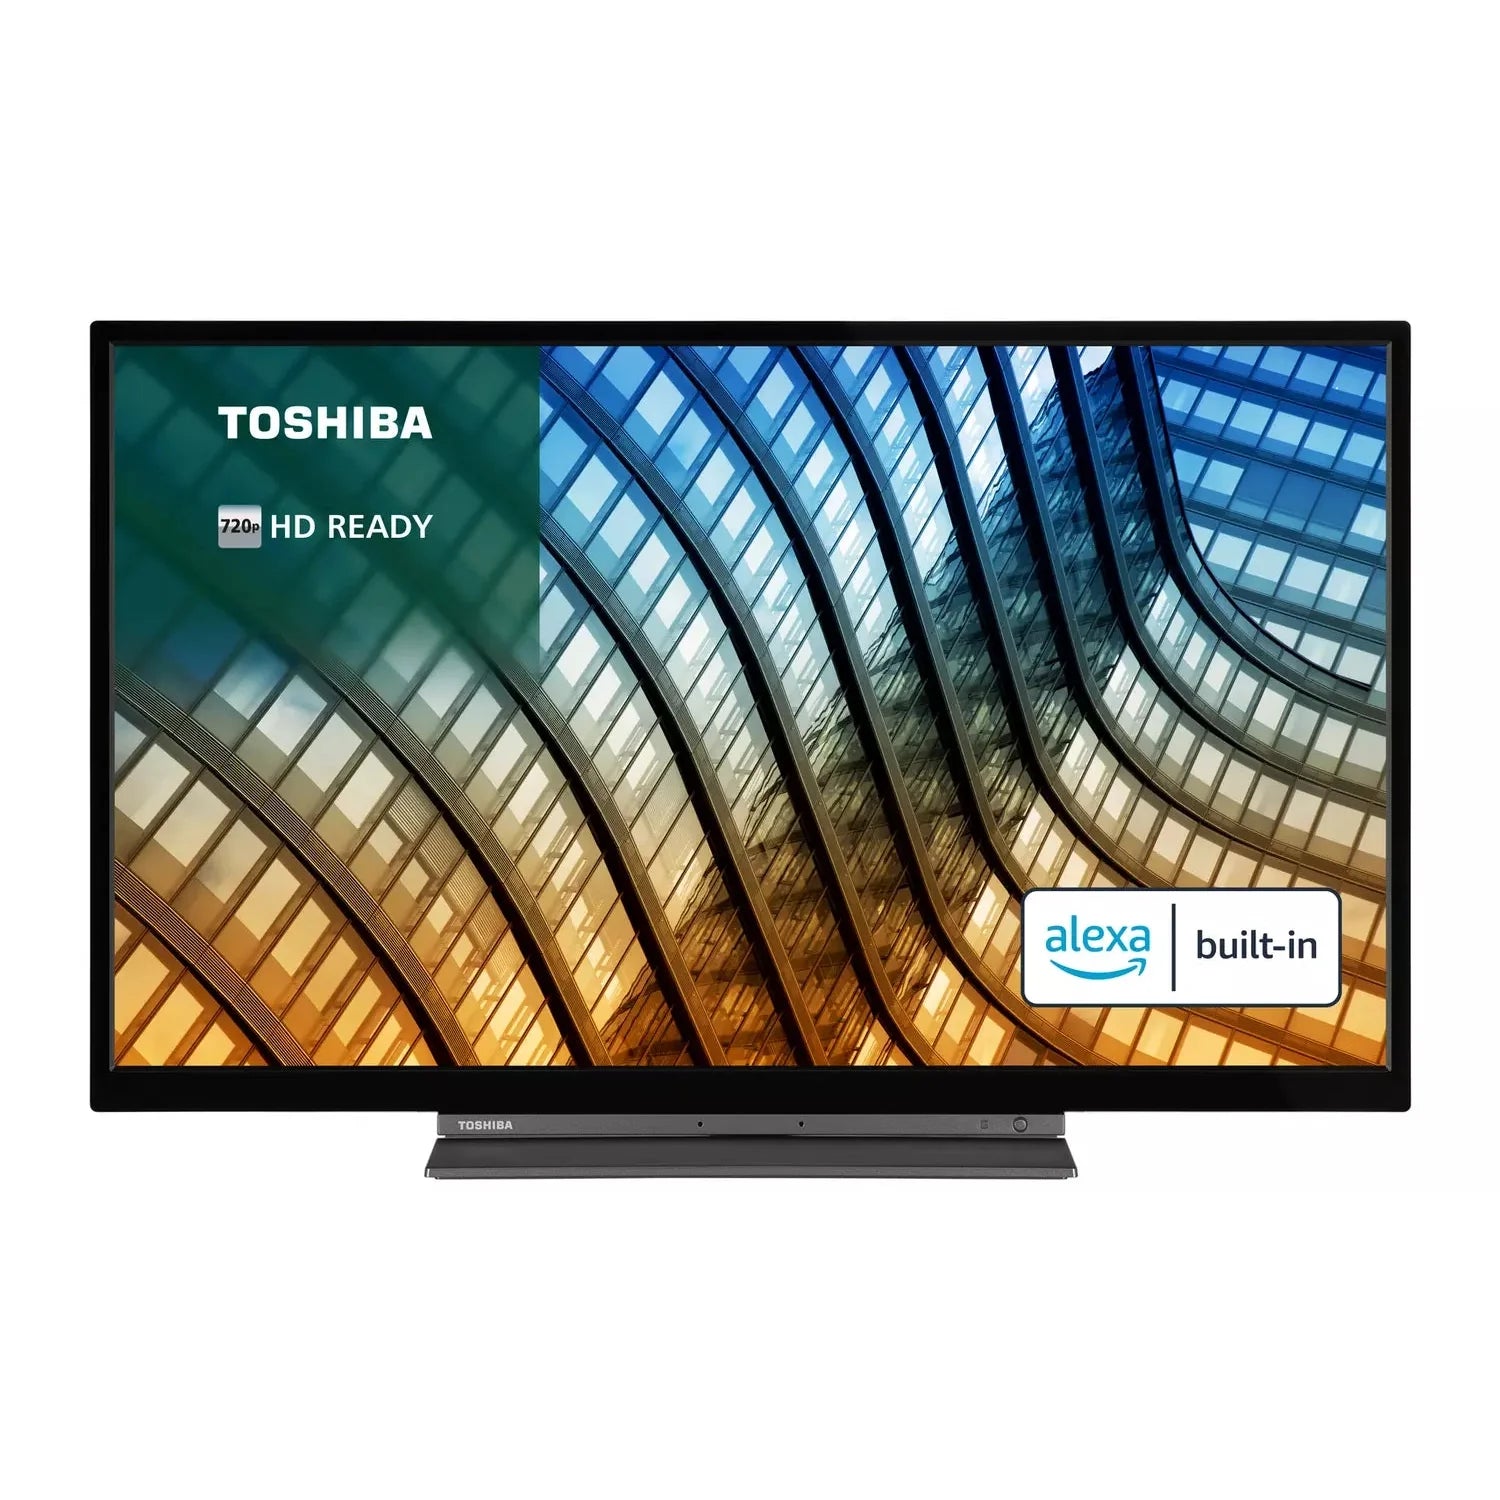 Toshiba 32WK3C63DB 32" Smart HD Ready HDR LED Freeview TV - Refurbished Excellent